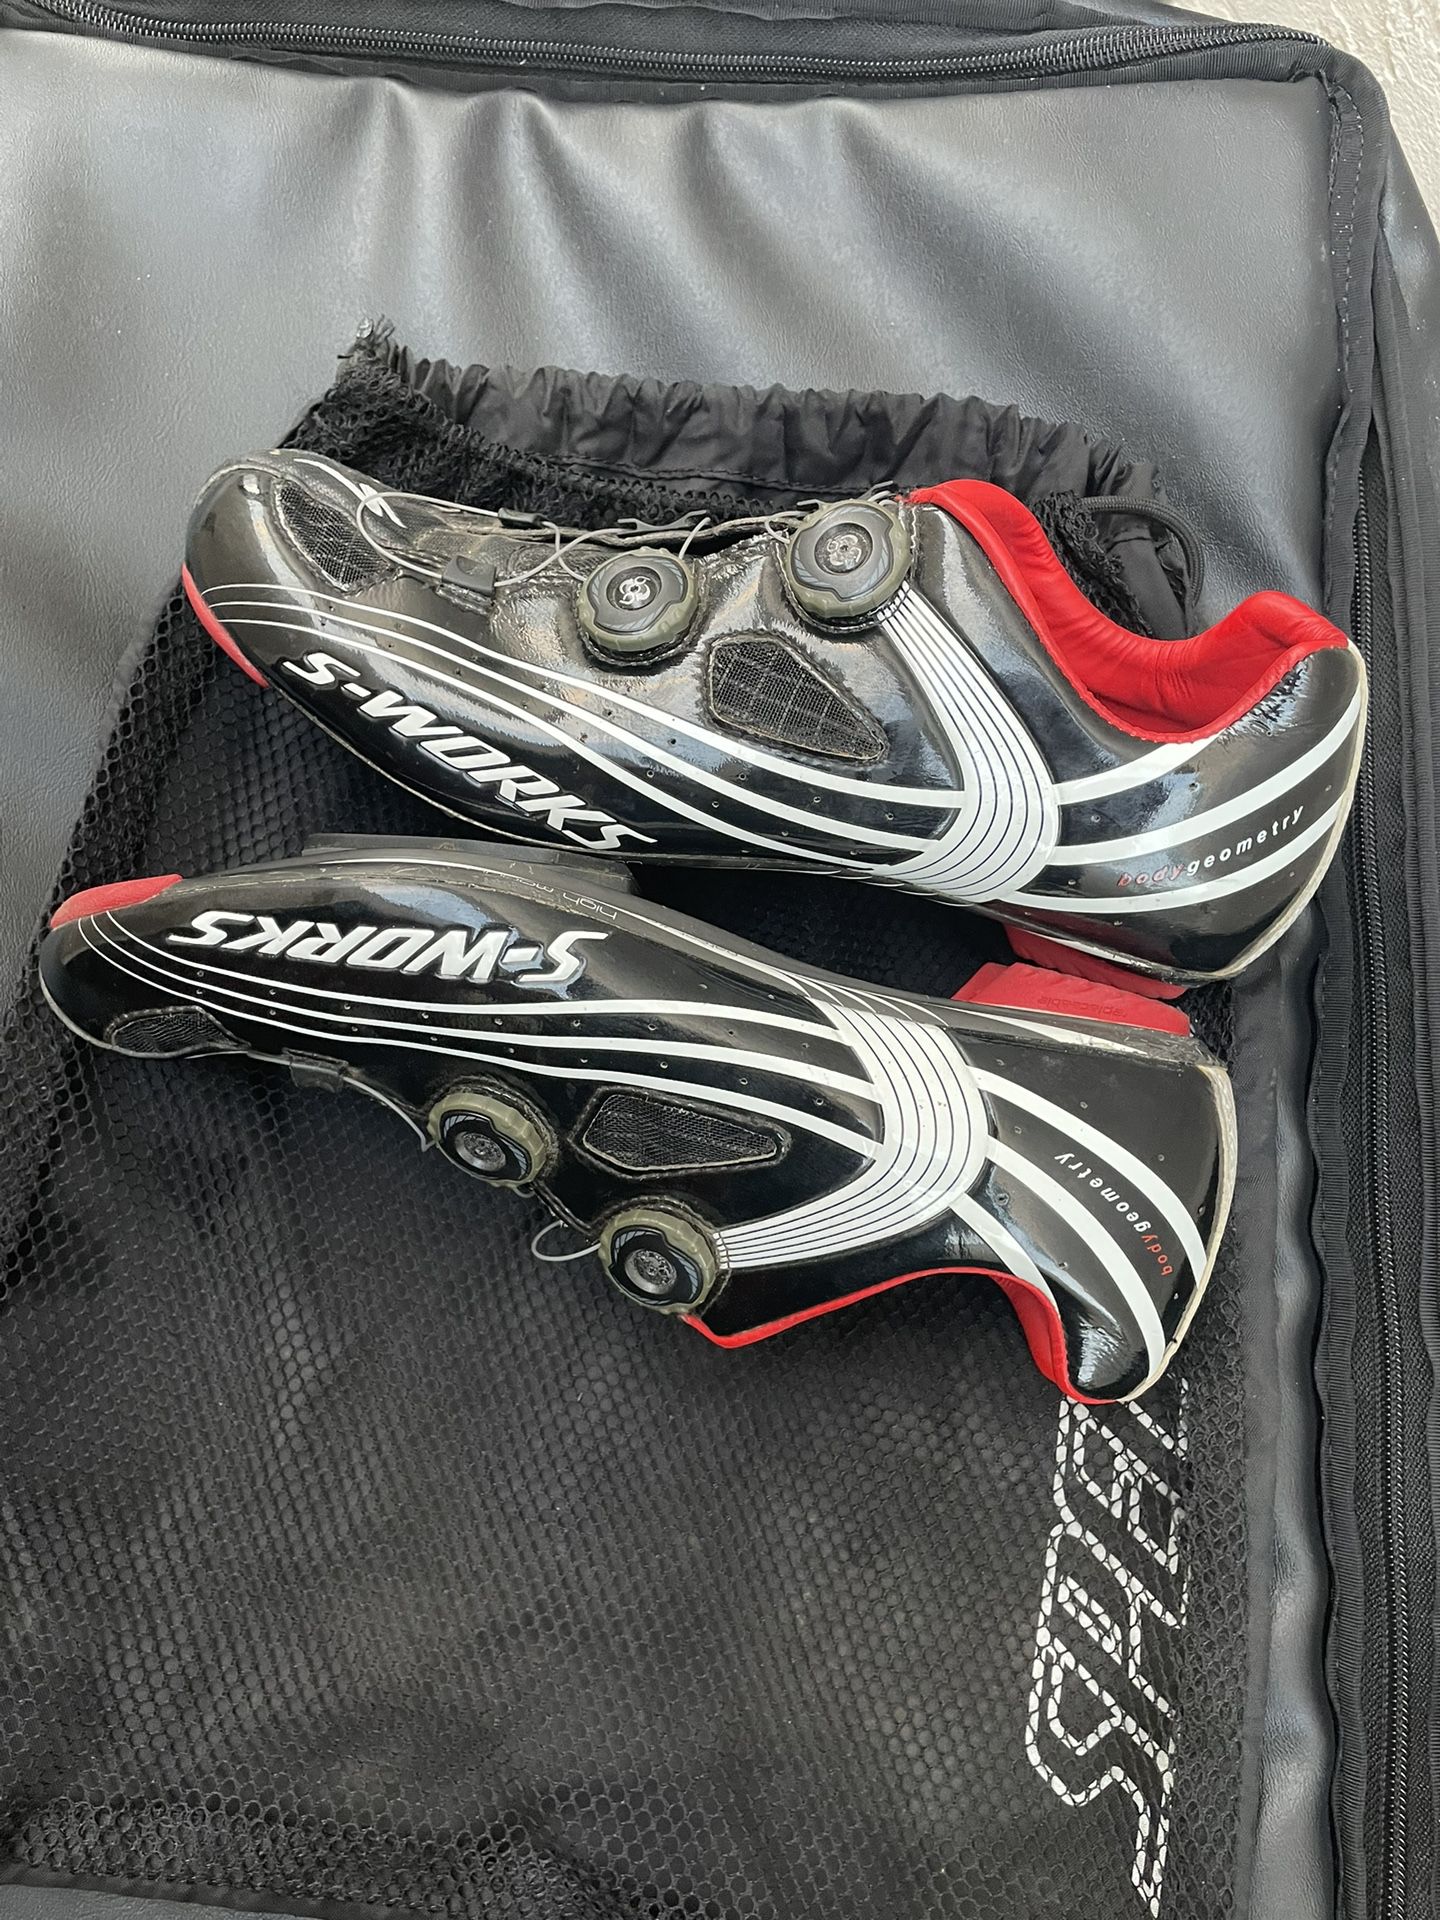 Specialized S-Works Road Bike Shoes